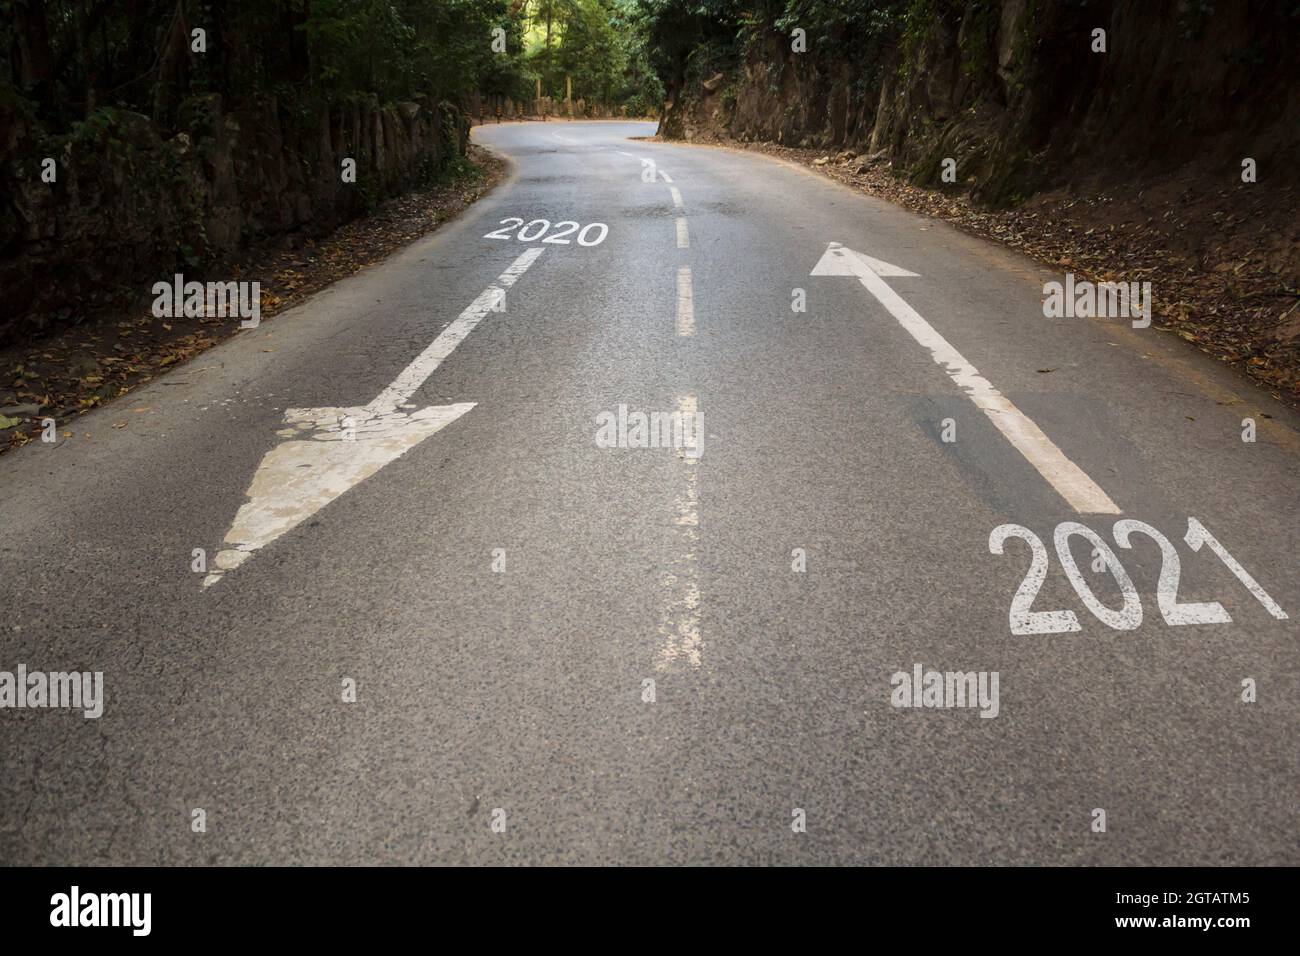 Road With The Inscription 2020 2021 Stock Photo